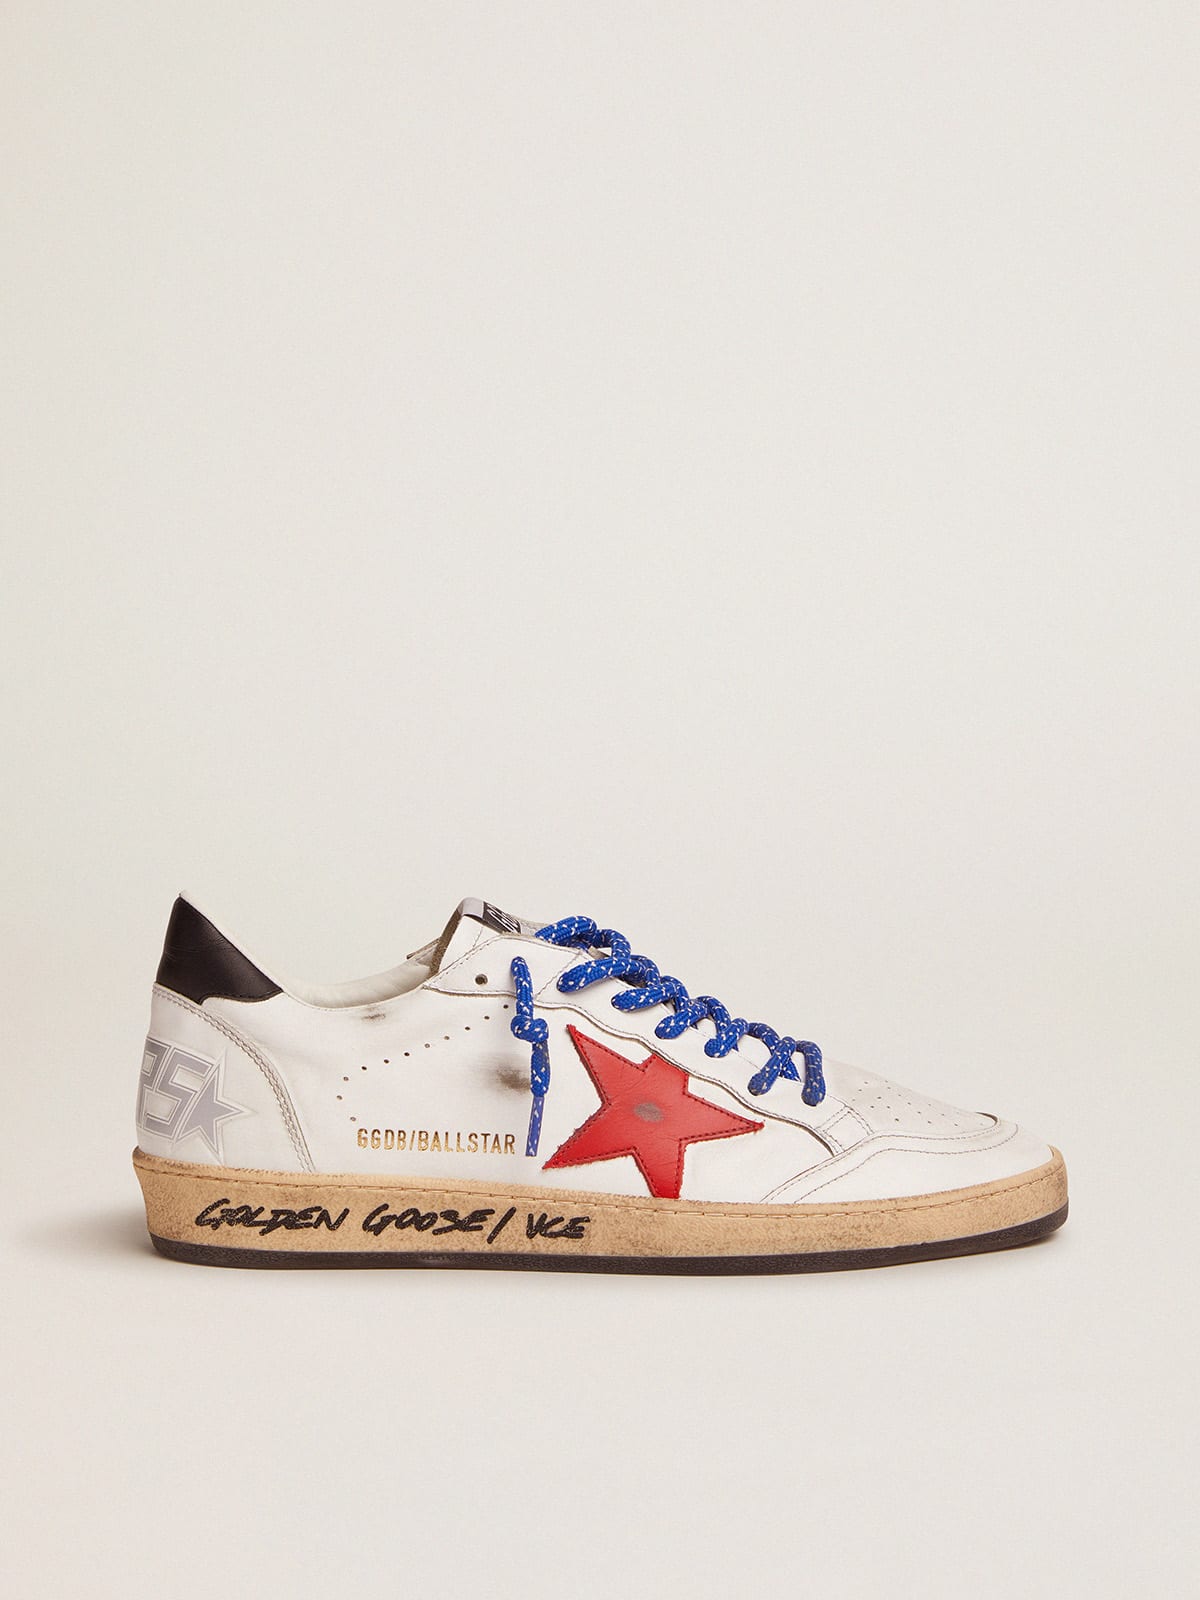 Golden Goose - Ball Star sneakers in white leather with signature on the foxing and red star in 